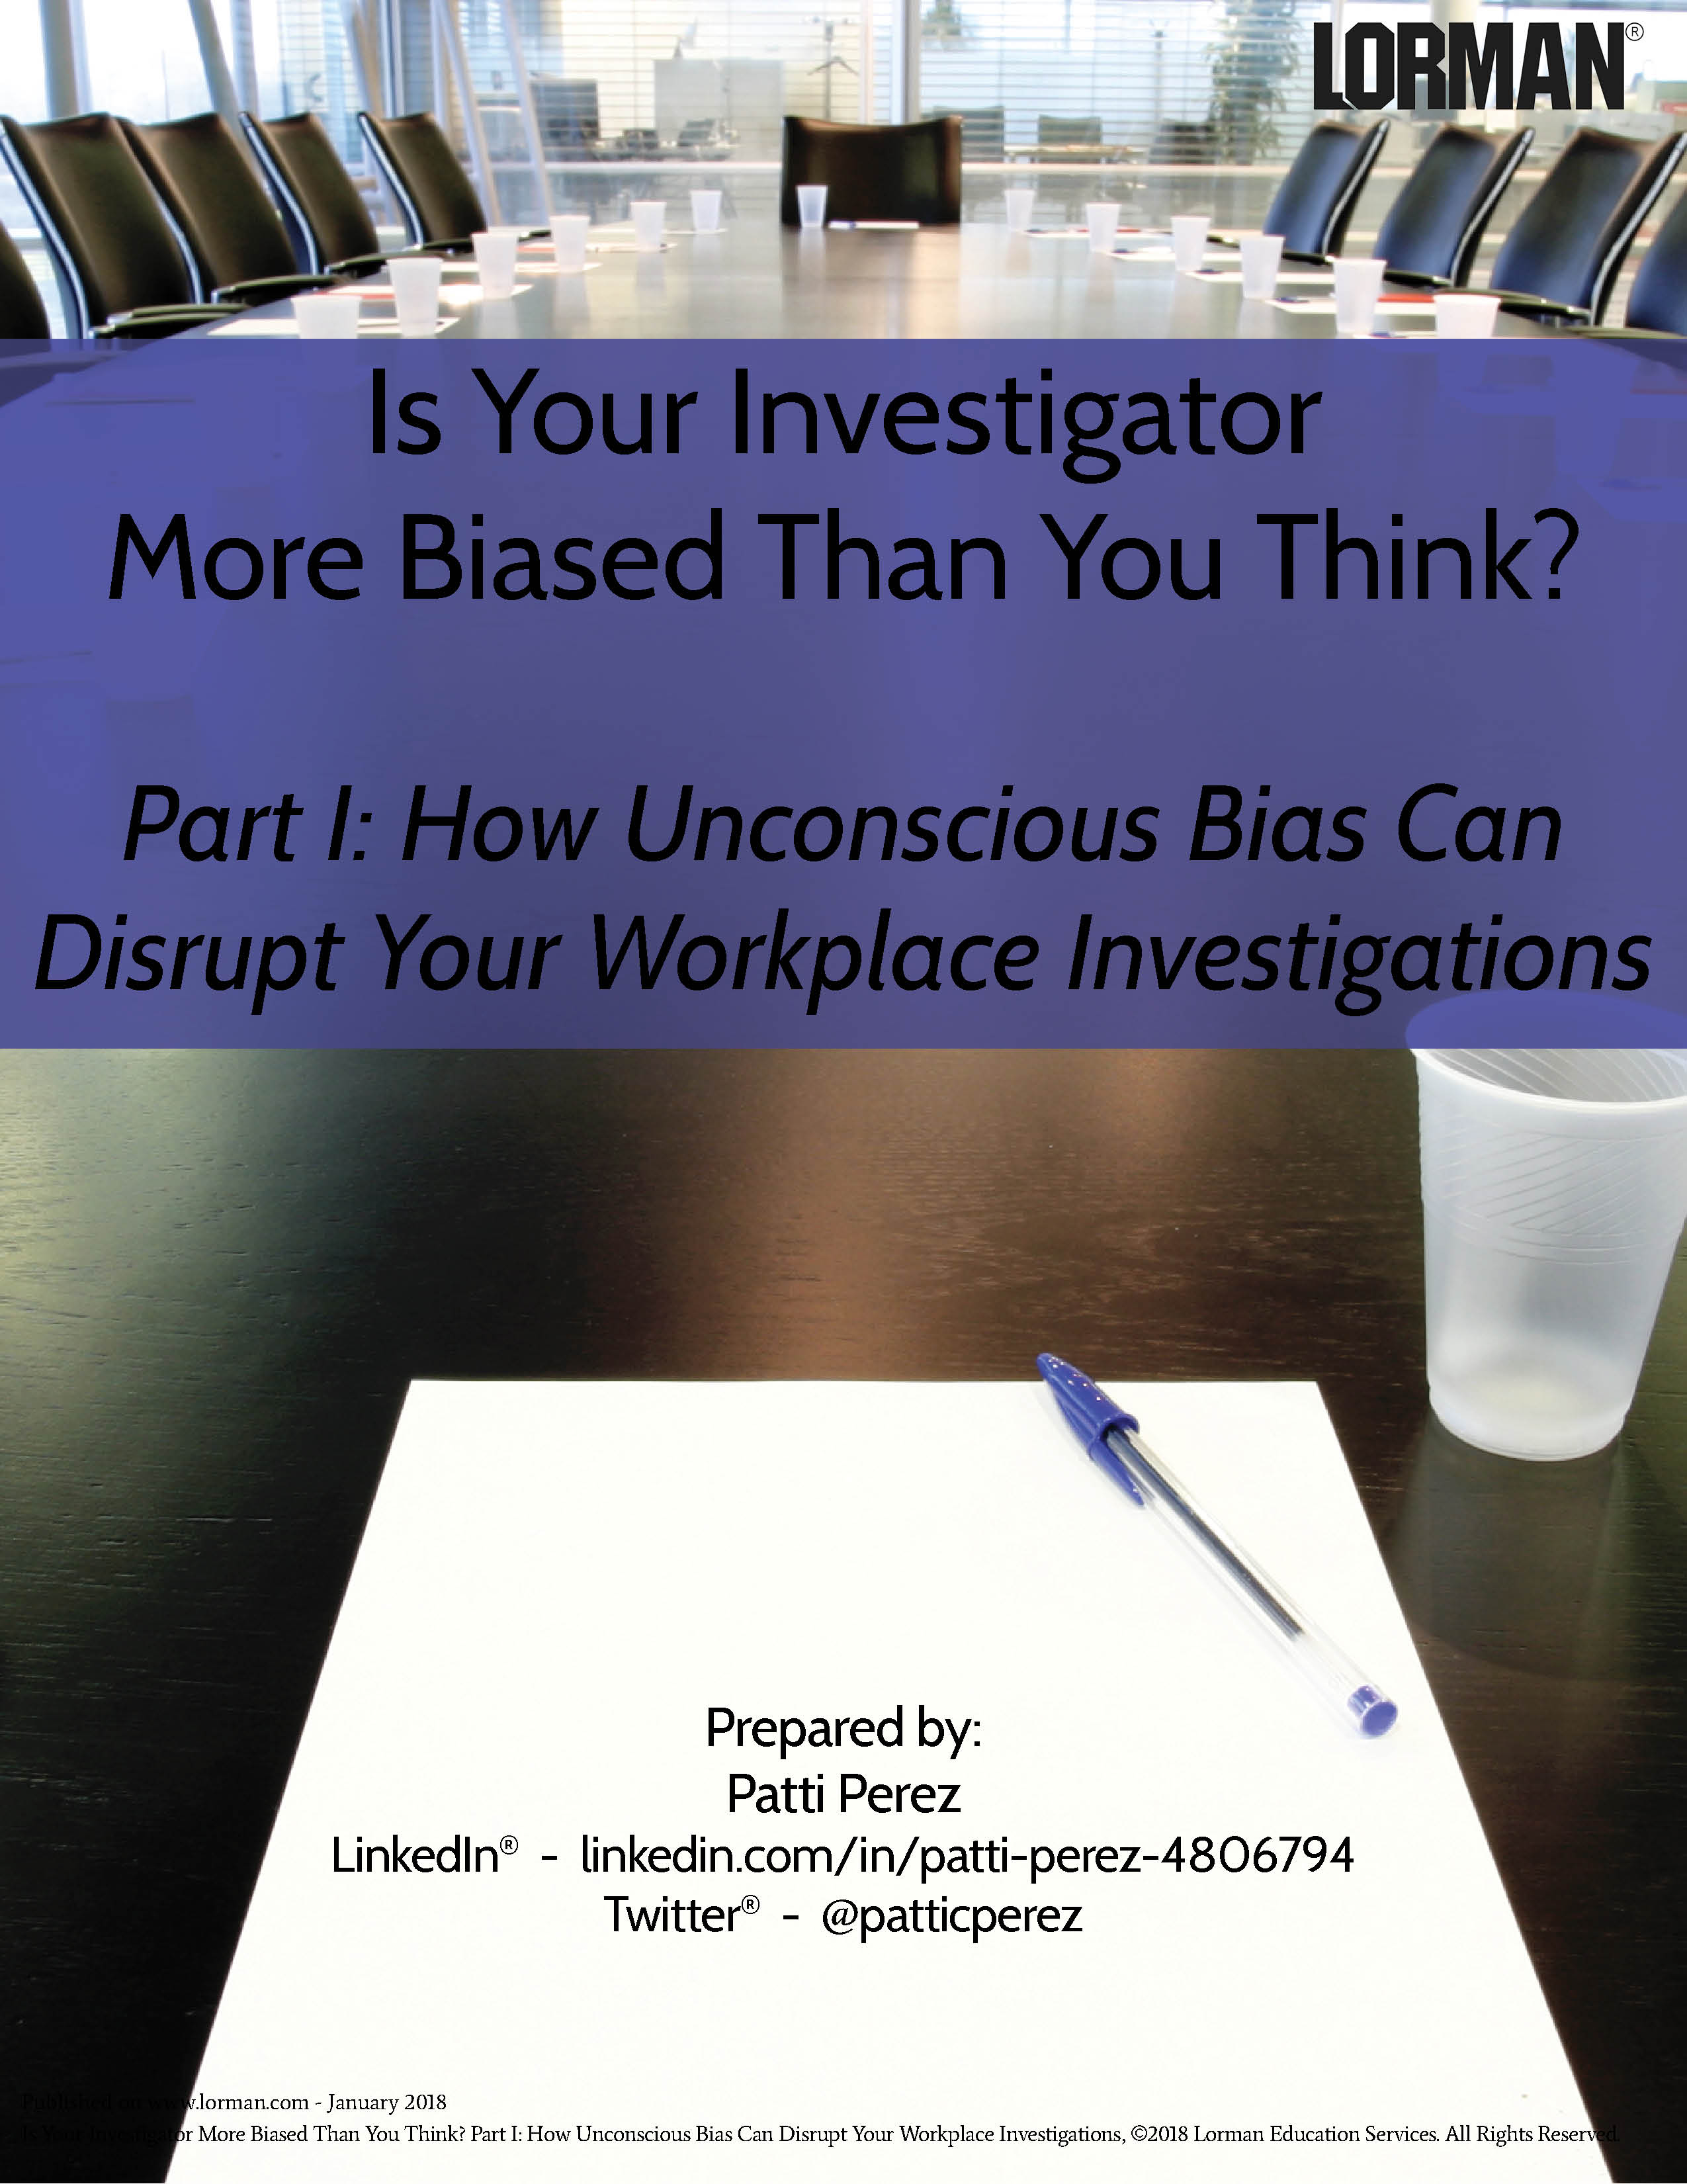 Is Your Investigator More Biased Than You Think? Part I